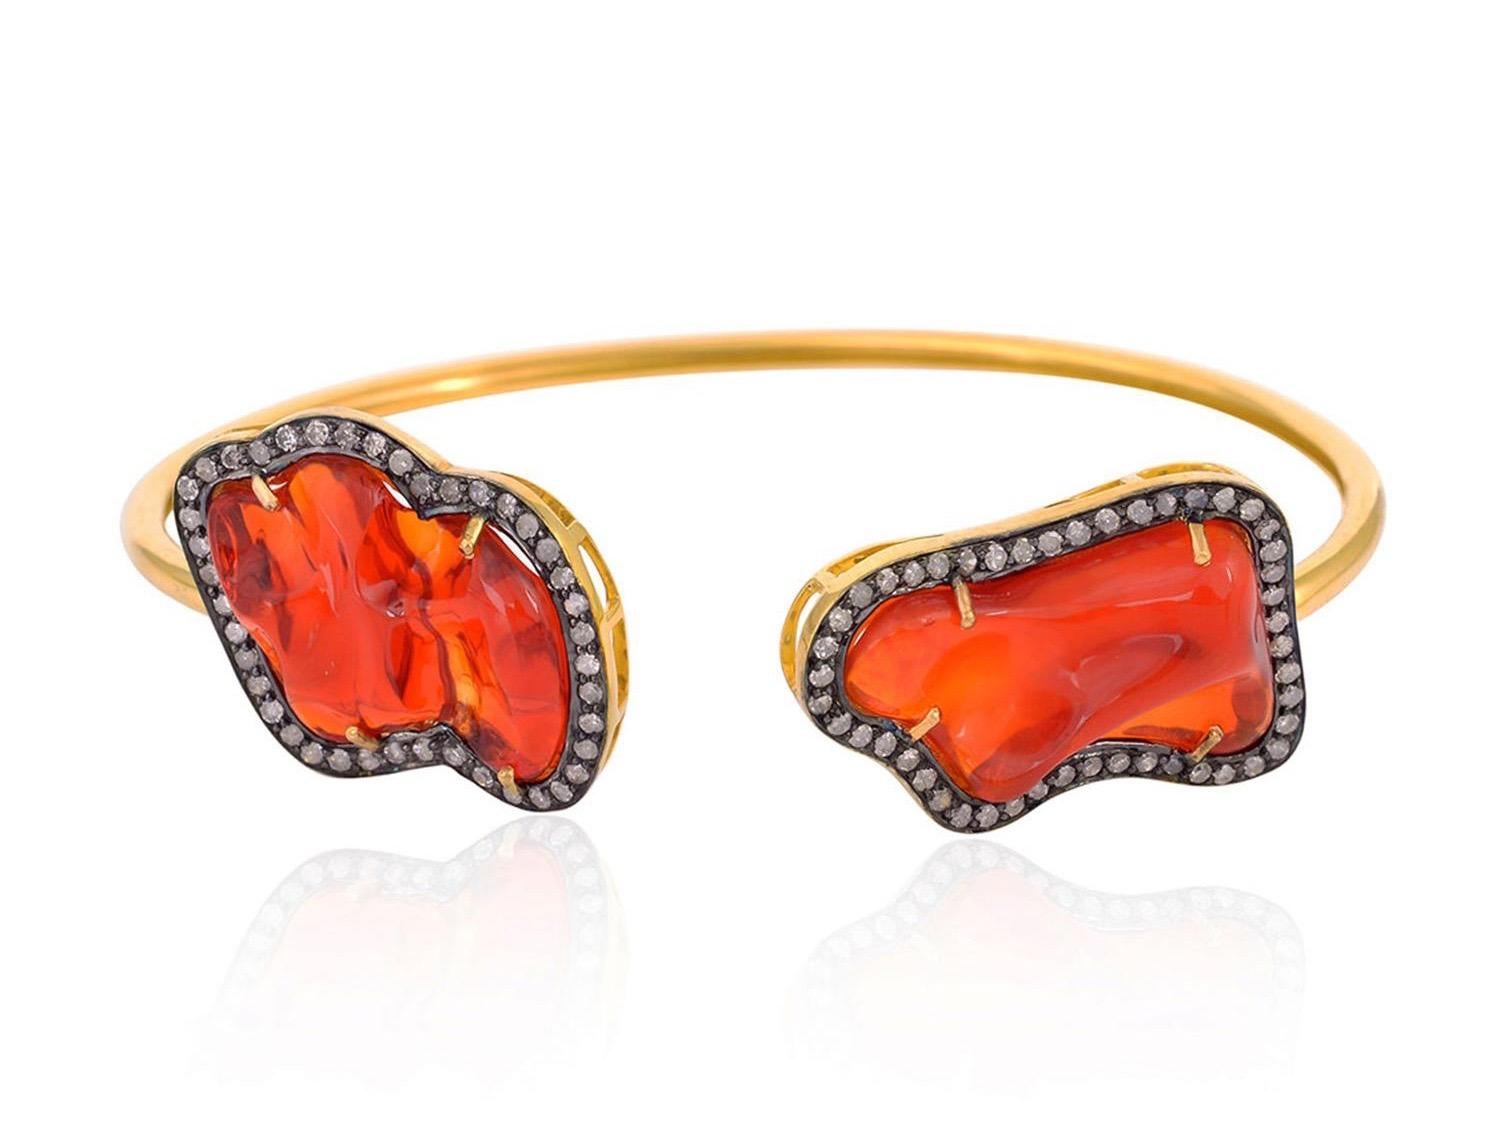 Beautifully crafted from 18-karat yellow gold & sterling silver.  It has an open silhouette that's tipped with 14.7-carats fire opal and .87 carats diamonds in blackened finish.

FOLLOW  MEGHNA JEWELS storefront to view the latest collection &